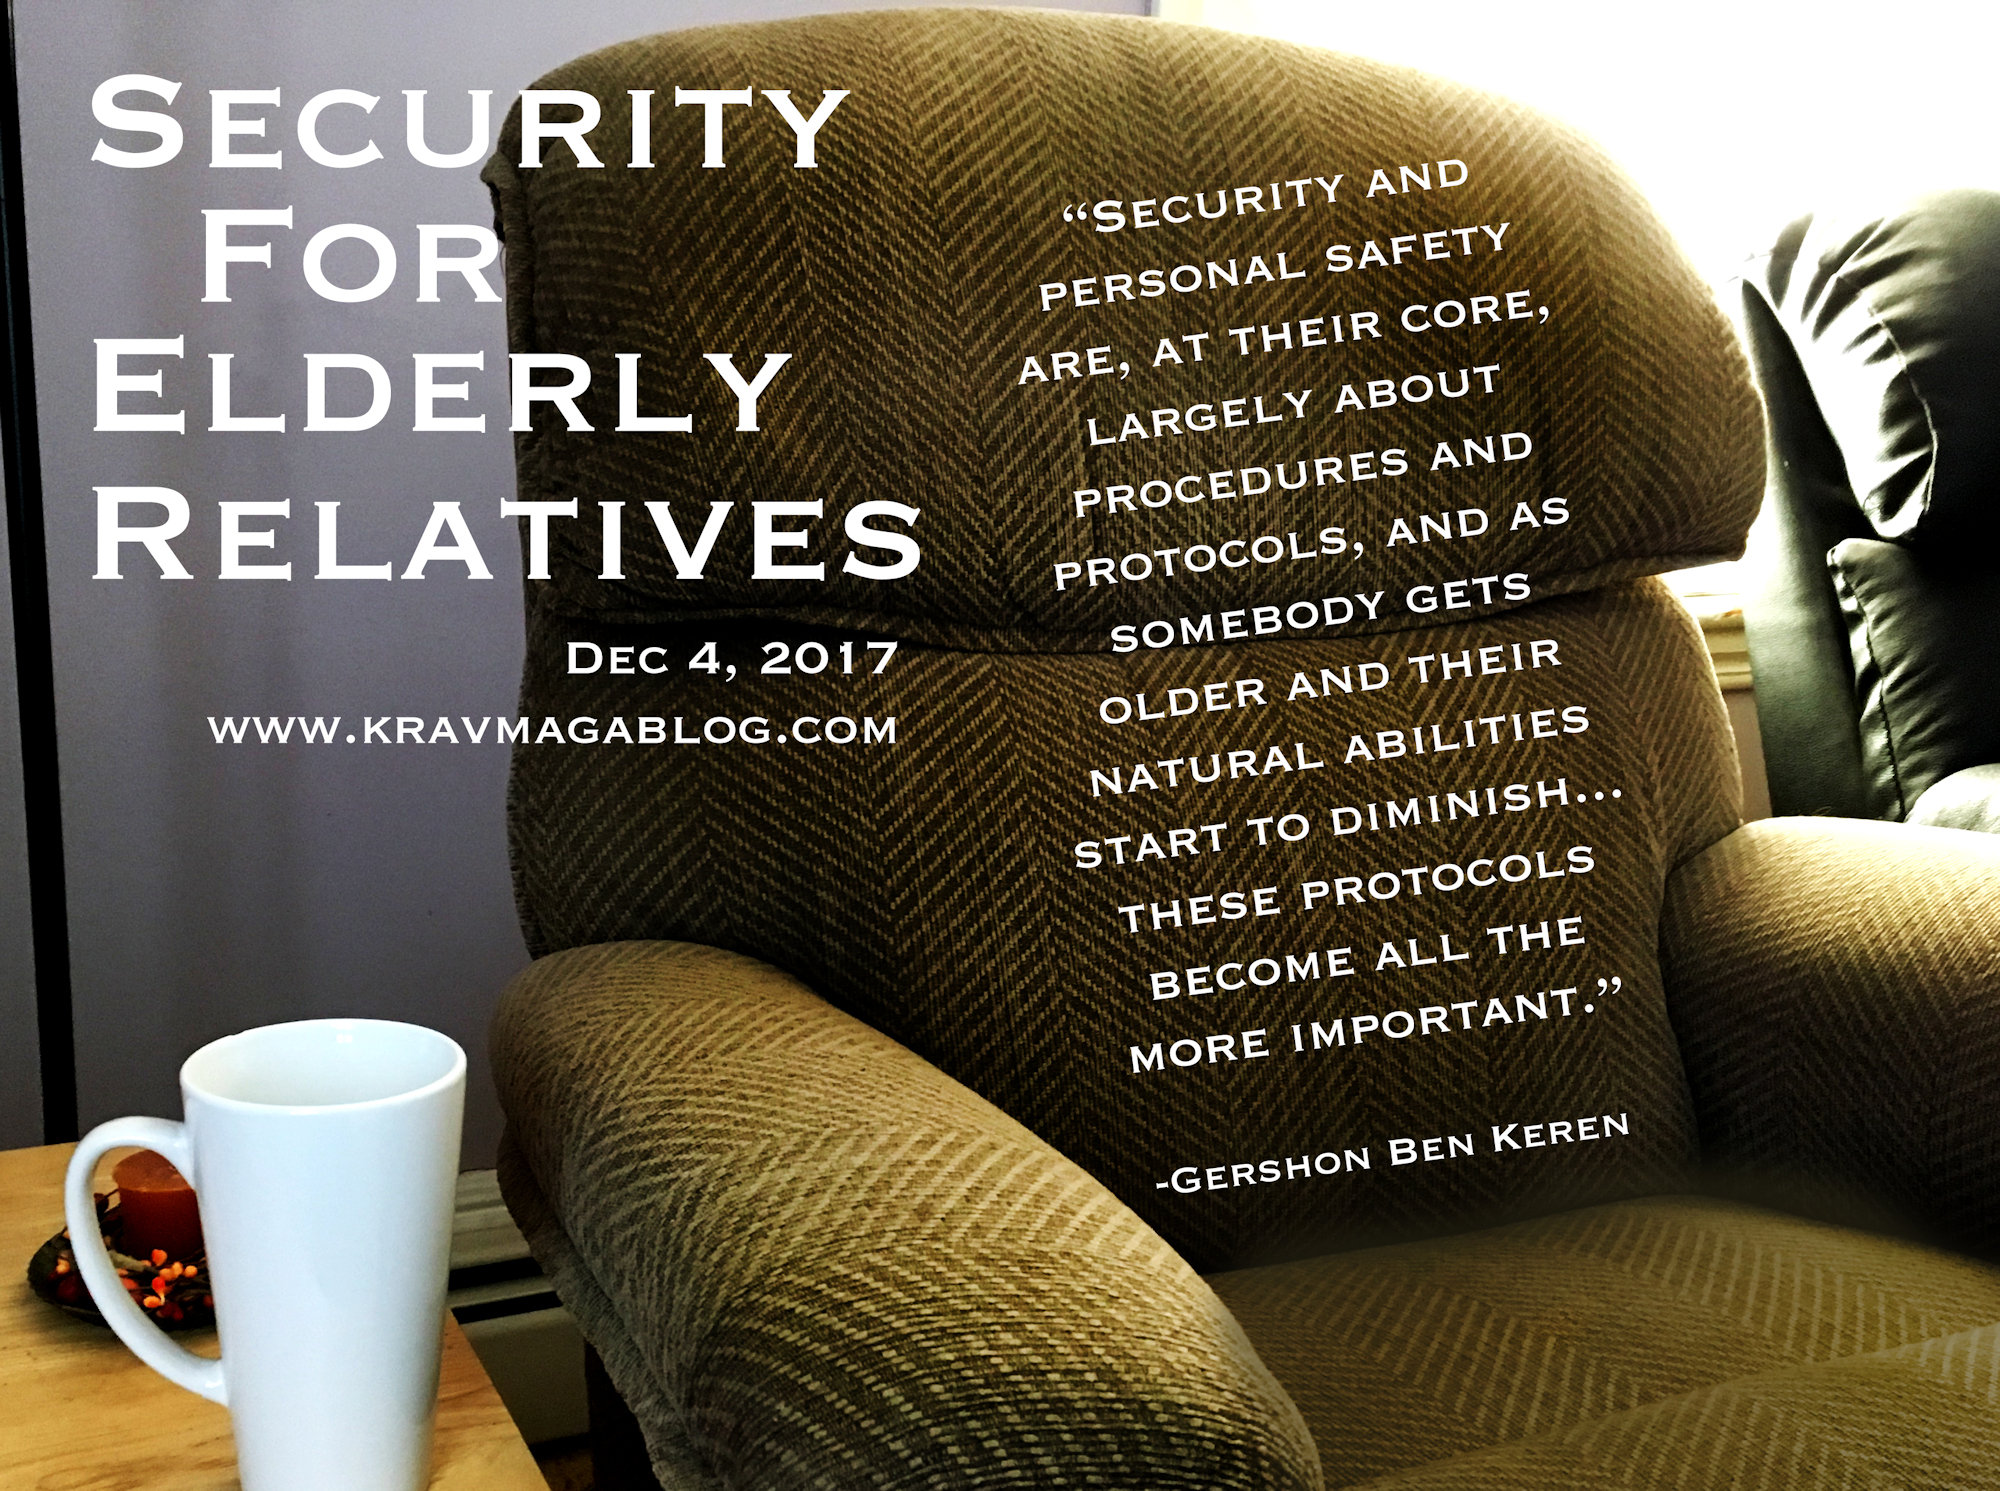 Blog About Security For Elderly Relatives